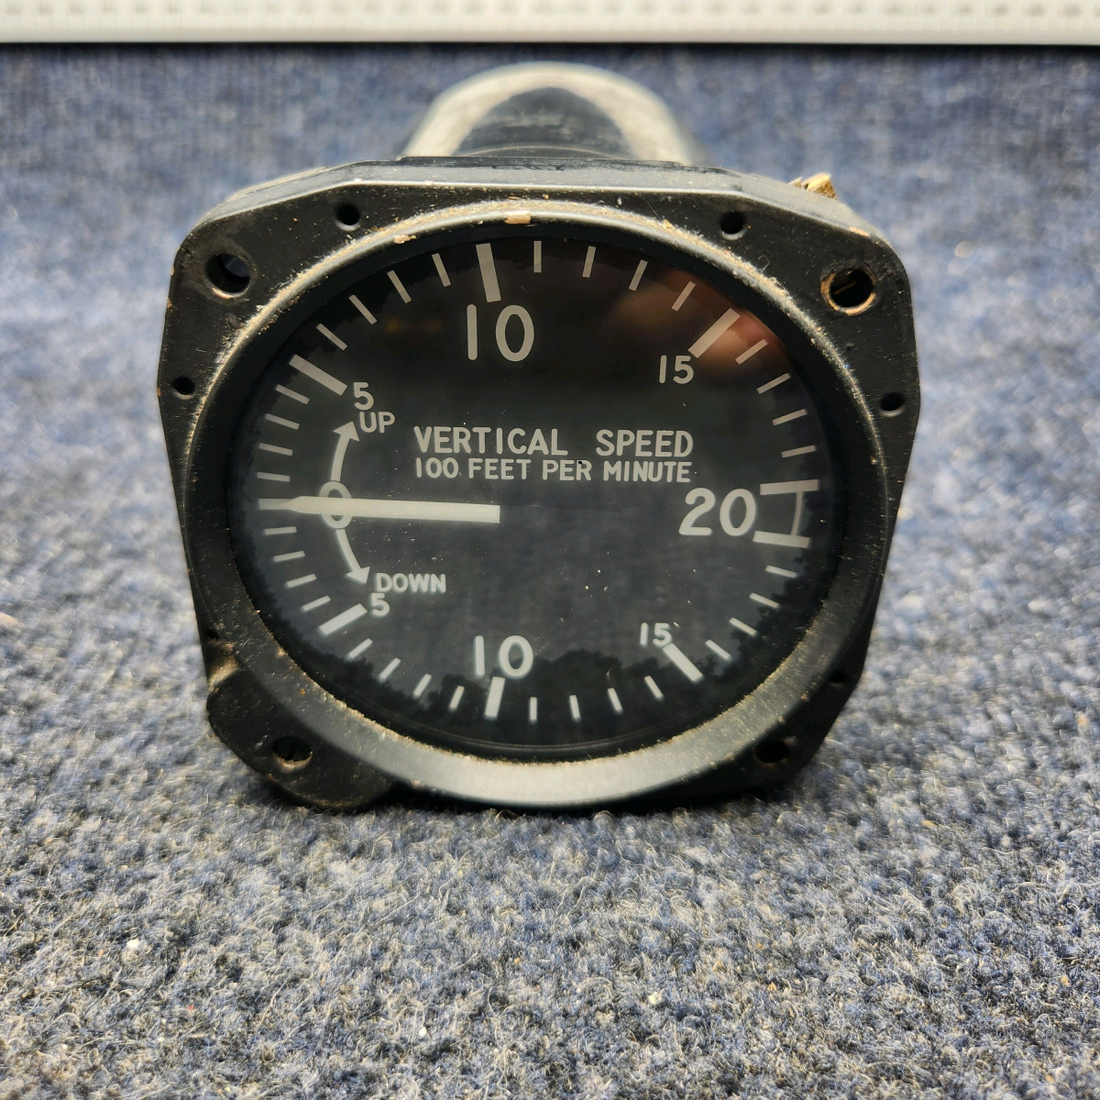 Used aircraft parts for sale, 7000 PIPIR PA32RT-300 UNITED INSTRUMENTS VERTICAL SPEED INDICATOR